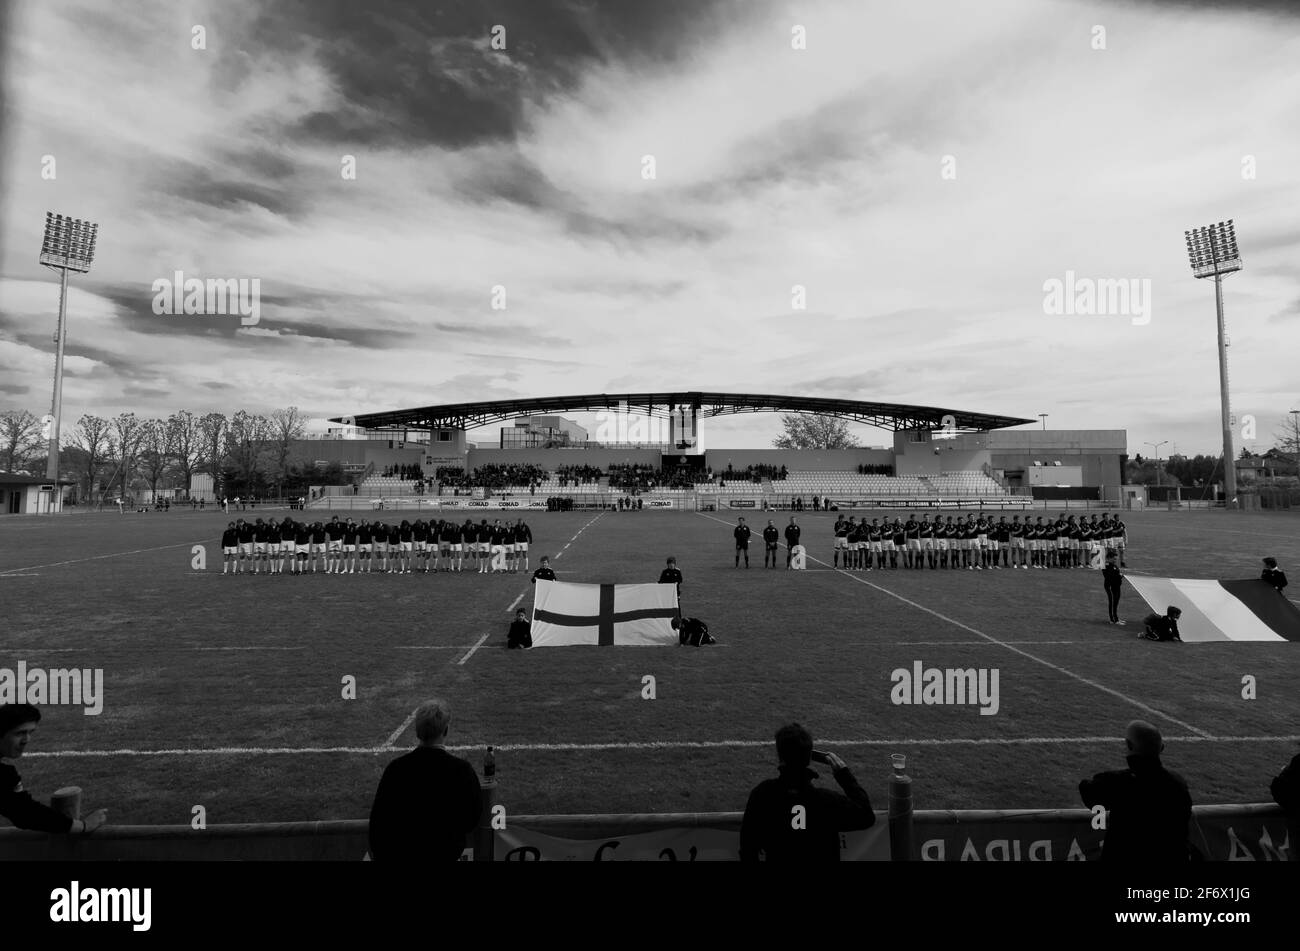 The rugby stadium in Parma, Italy. The teams line up behind their flags prior to a game between England U16s and Italy U17s in 2012..B&W Stock Photo